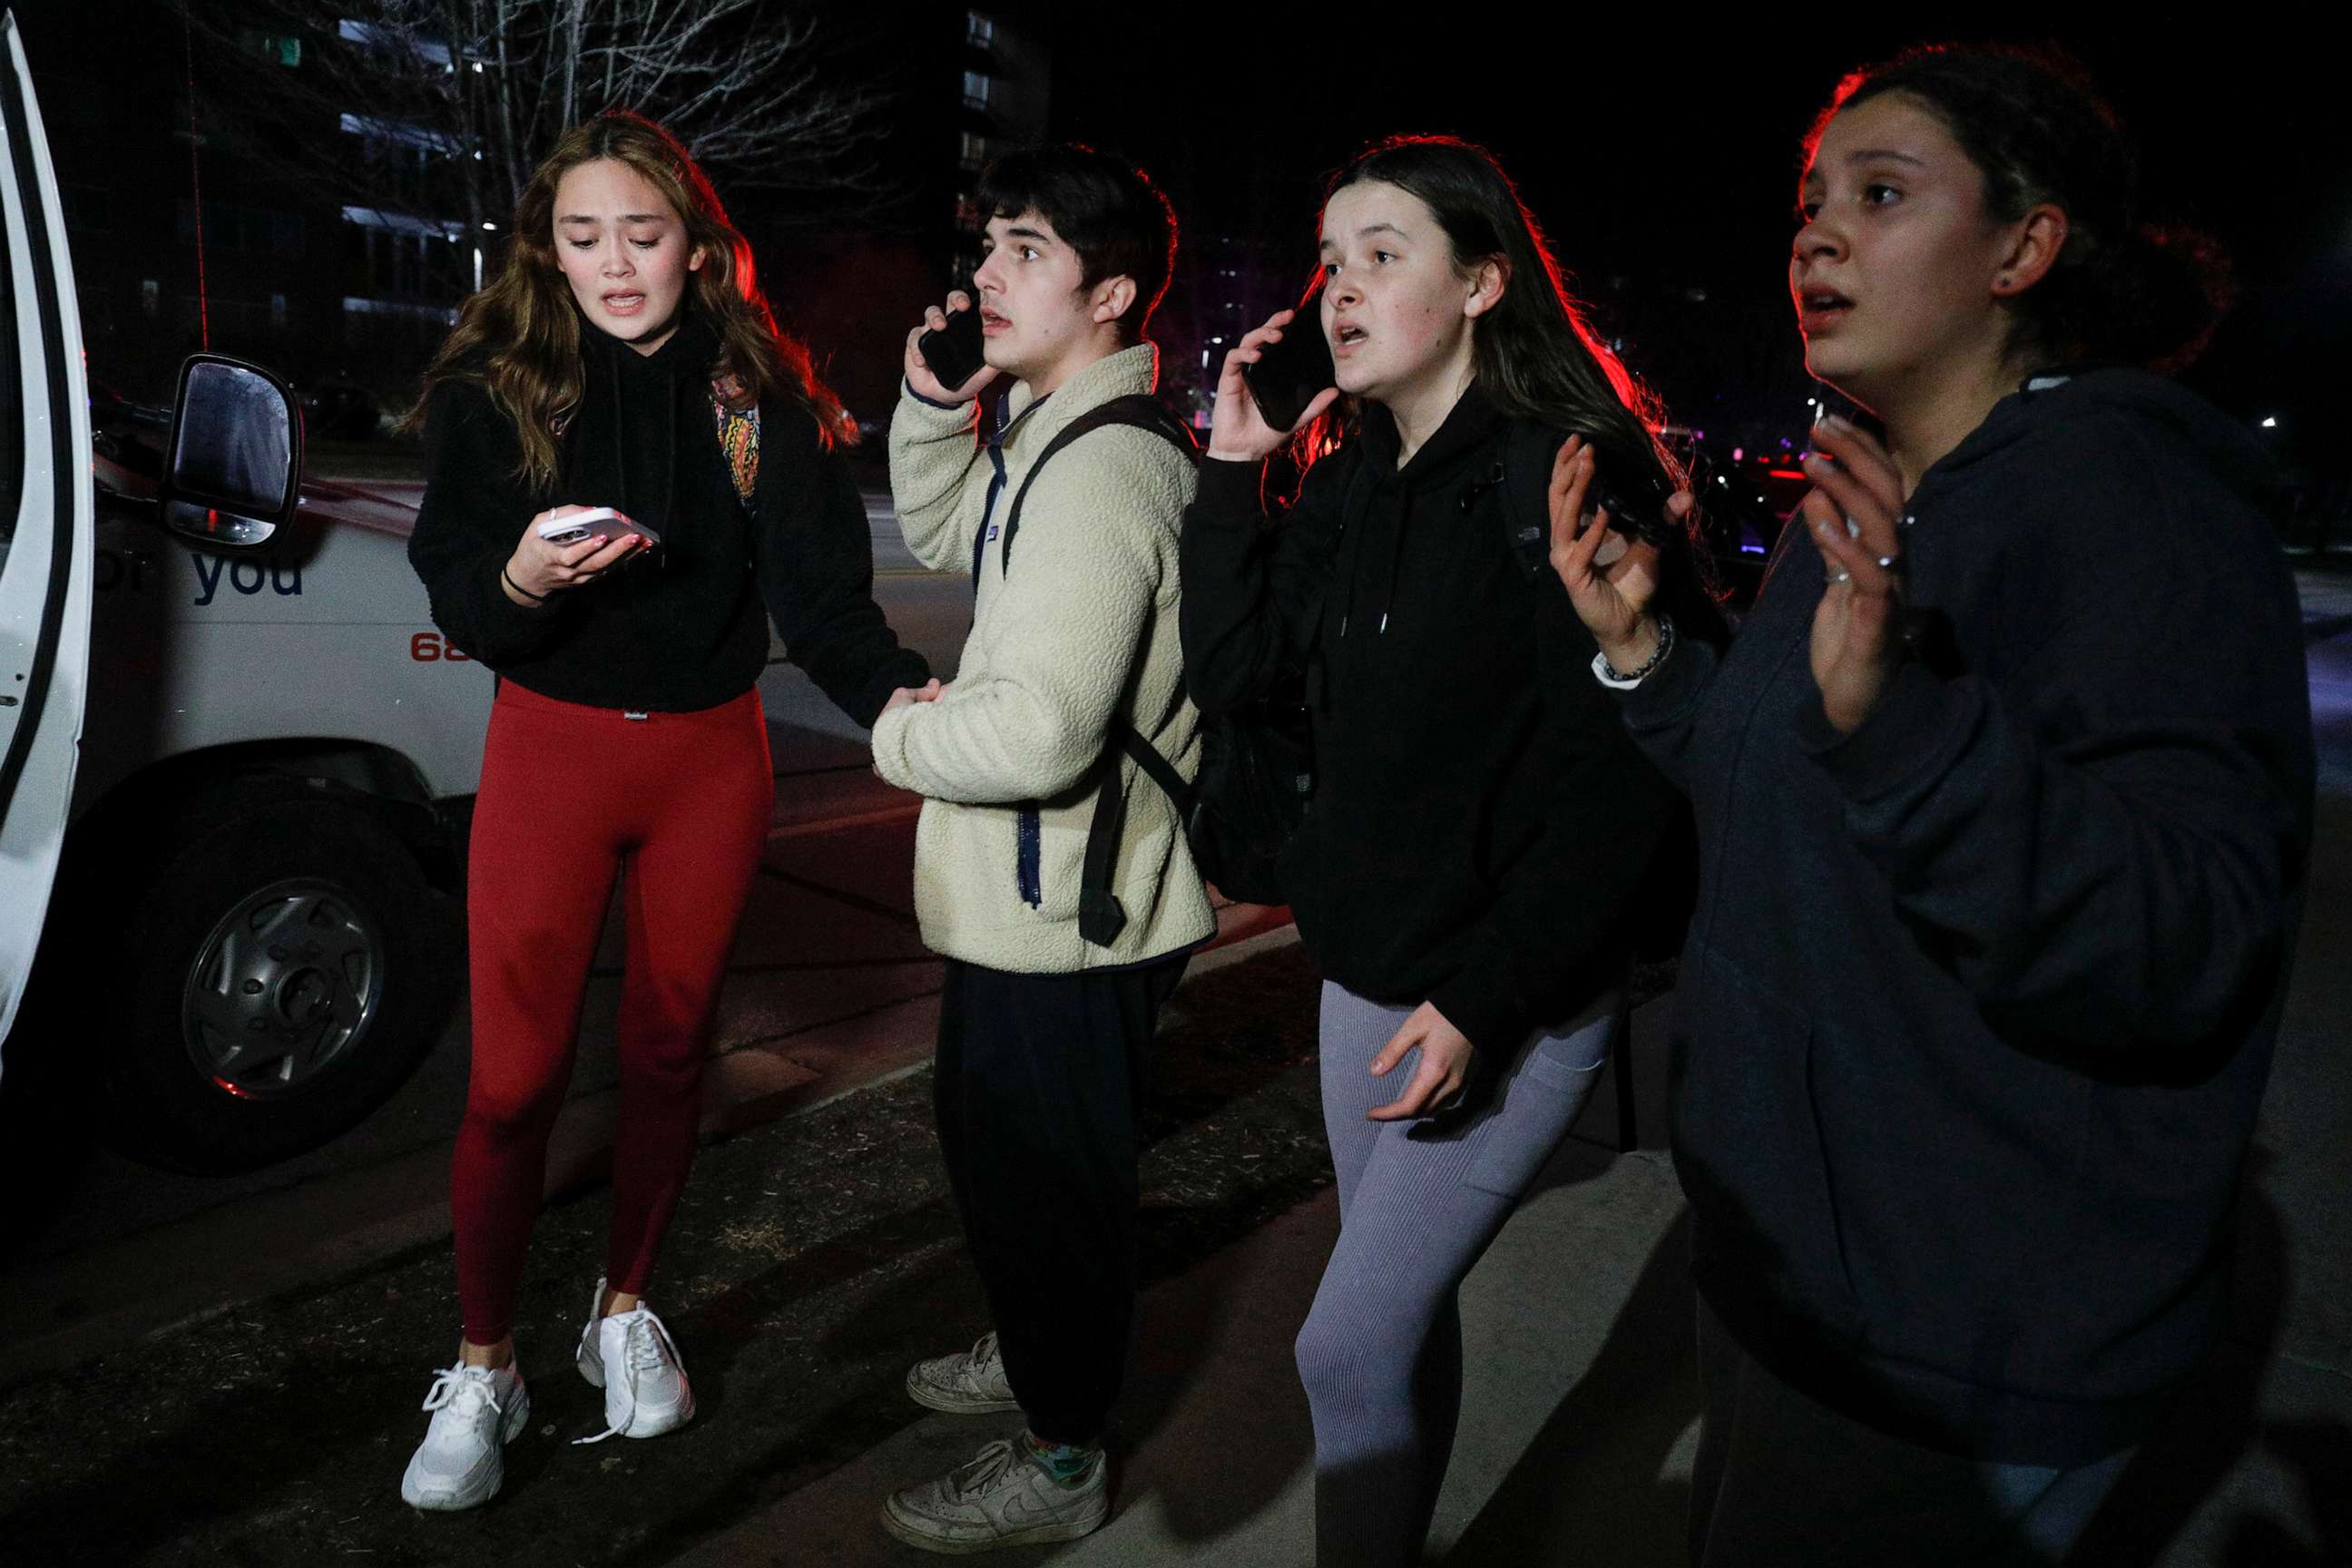 PHOTO: Michigan State University students react during an active shooter situation on campus on Feb. 13, 2023, in Lansing, Michigan.